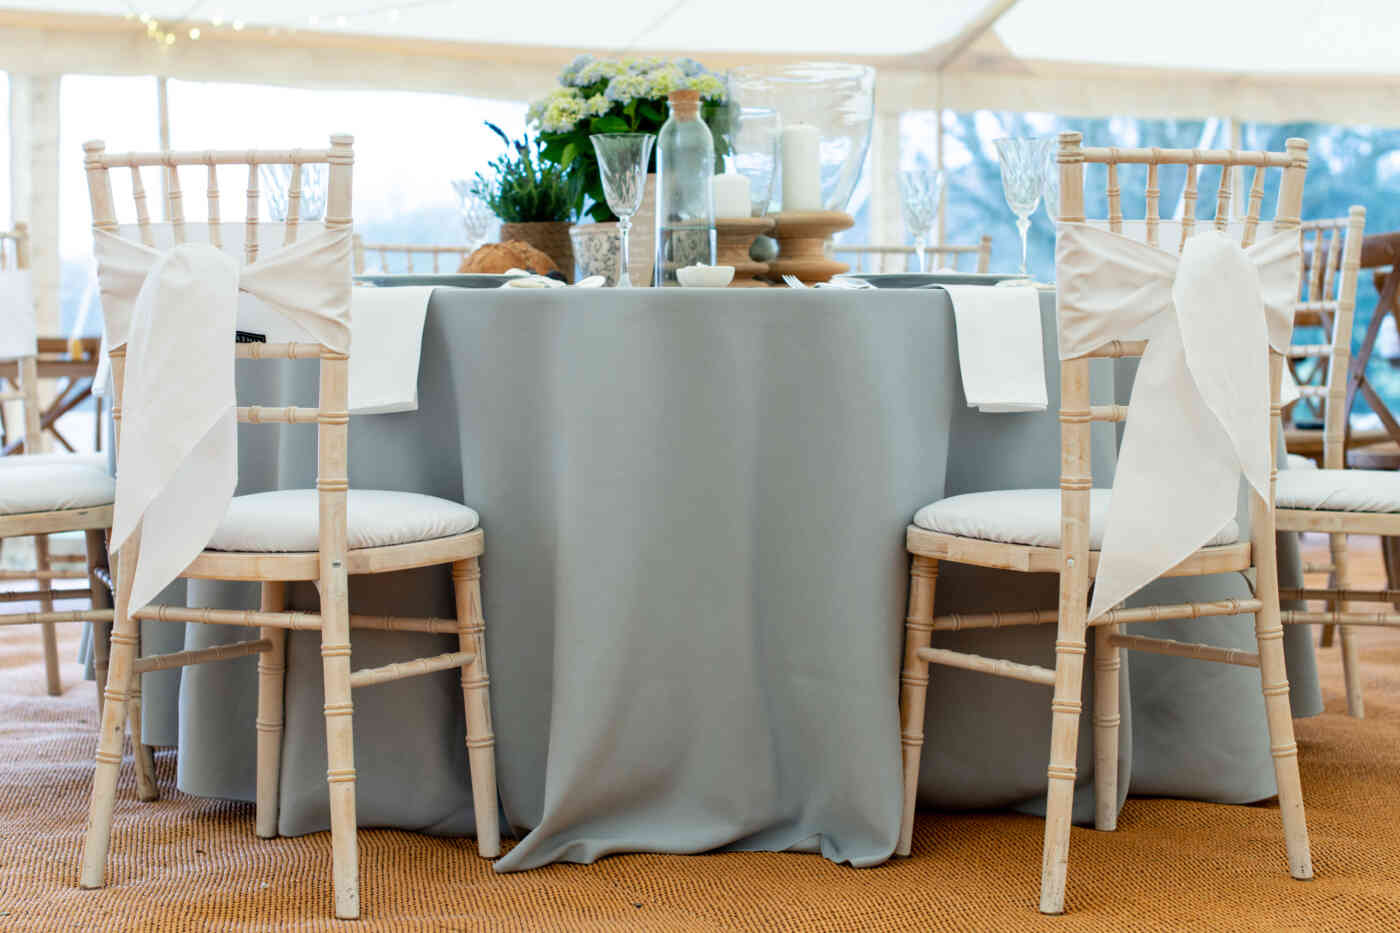 Tablecloth Size Guide Table Linen Hire, What Size Tablecloth For A 24 Inch Round Table